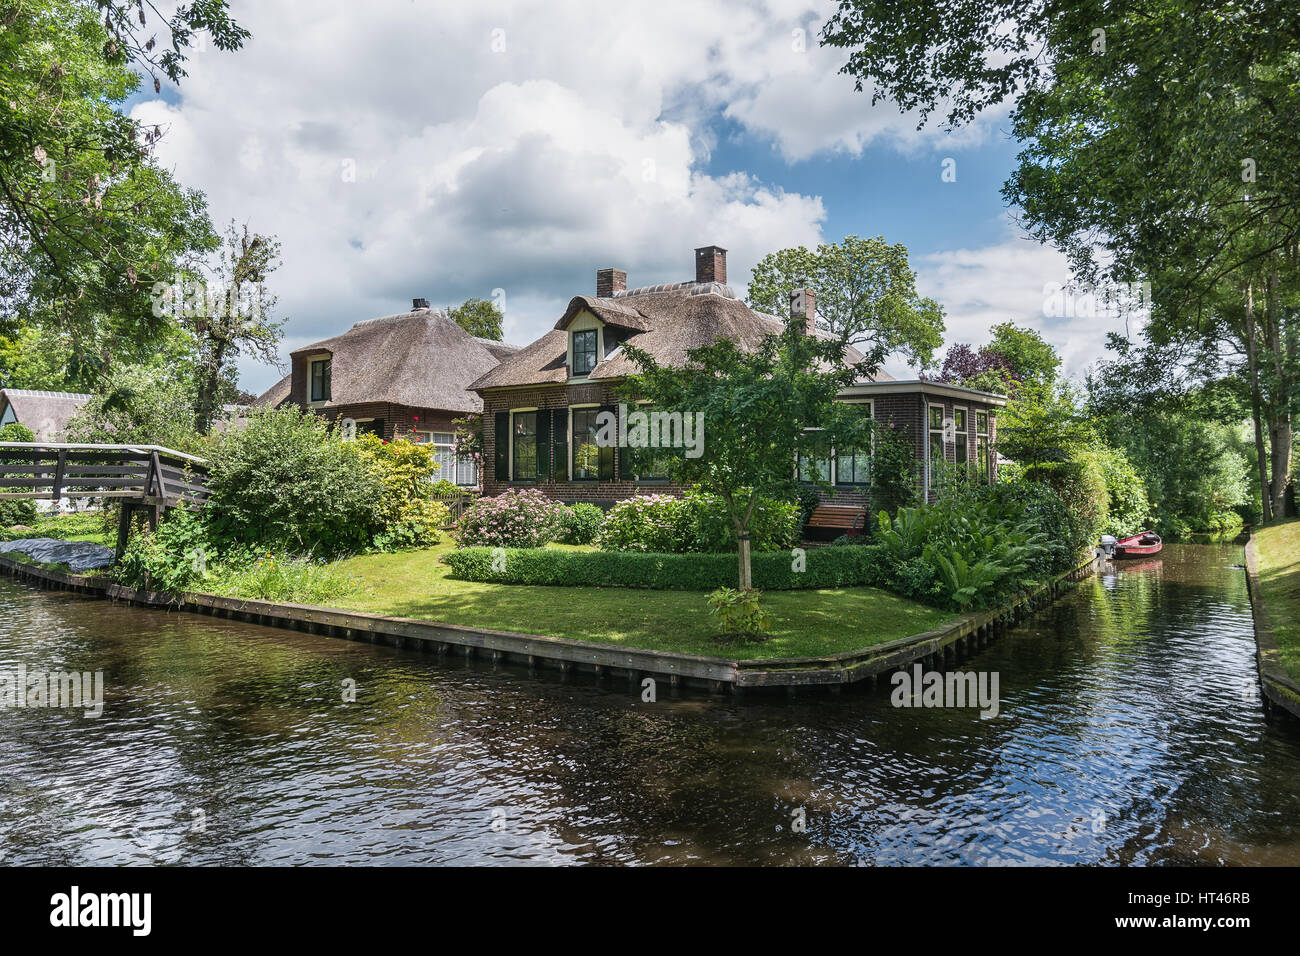 Giethoorn, Netherlands – June 29, 2016: View of a blooming garden in front of the house of the Dutch town Giethoorn. Stock Photo